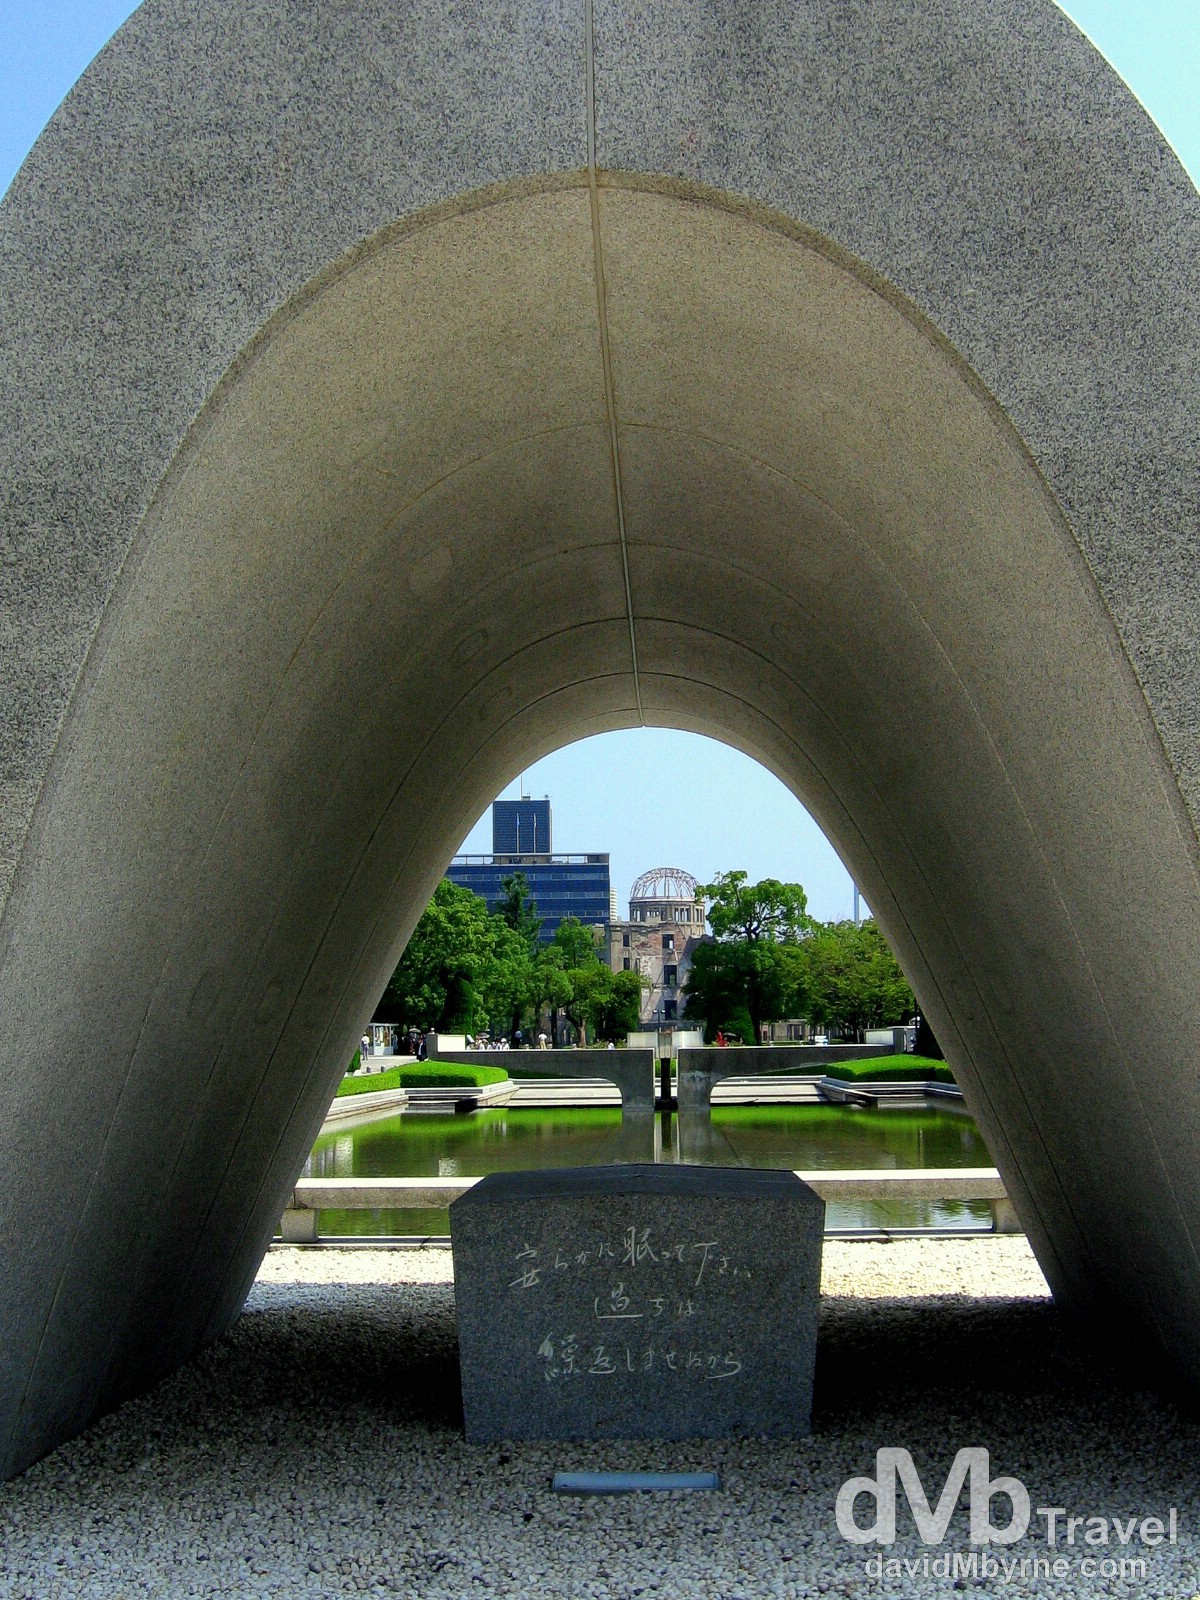 The distant A-bomb Dome as seen from under the arch of the Memorial Cenotaph in Hiroshima Peace Memorial Park, Hiroshima, Honshu, Japan. July 22nd, 2005.